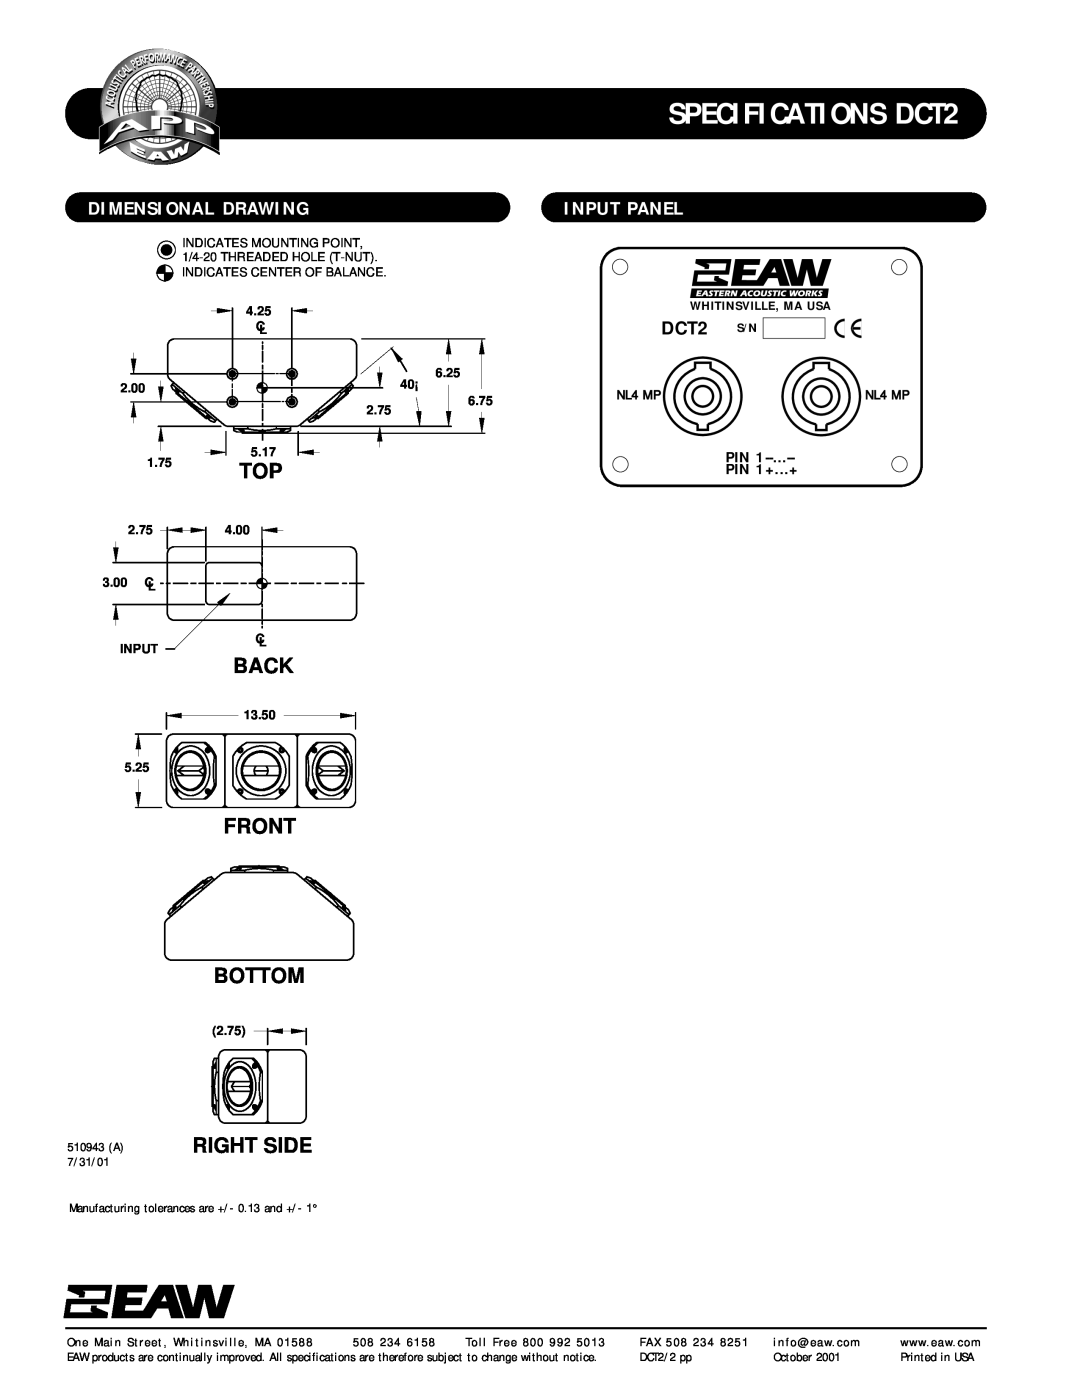 EAW Dimensional Drawing, Input Panel, SPECIFICATIONS DCT2, Back, Front Bottom, Right Side, PIN PIN 1+...+, 2.00, NL4 MP 